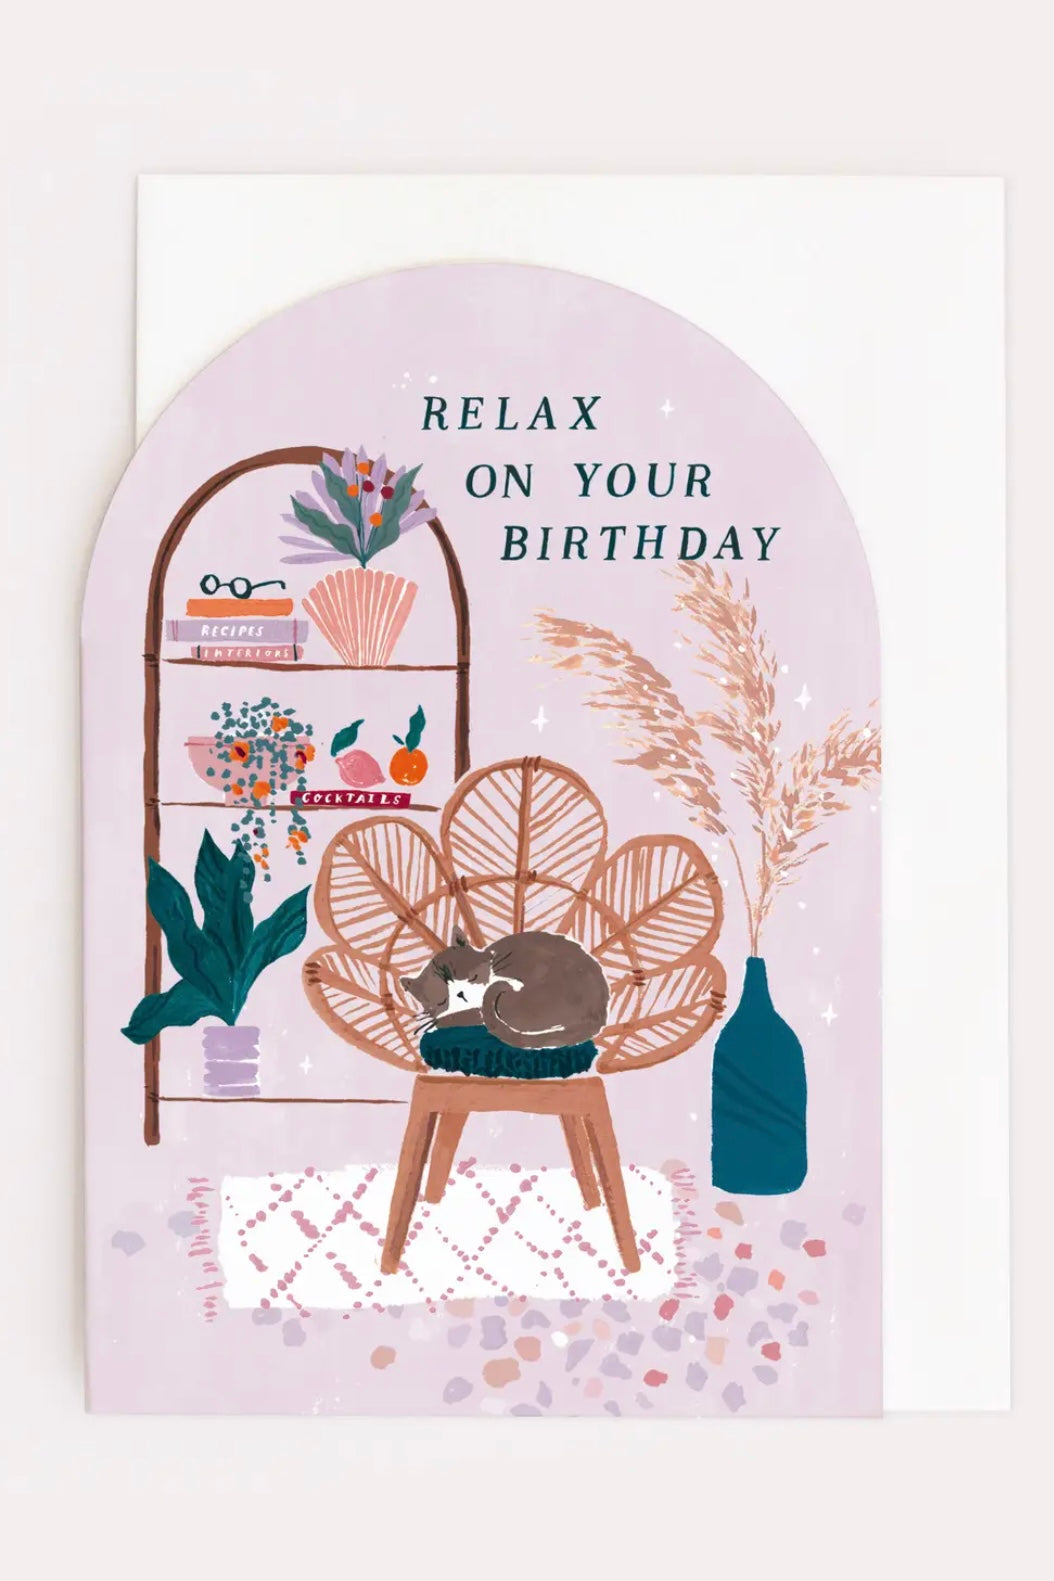 Kitty in ratan chair. Relax on your birthday card